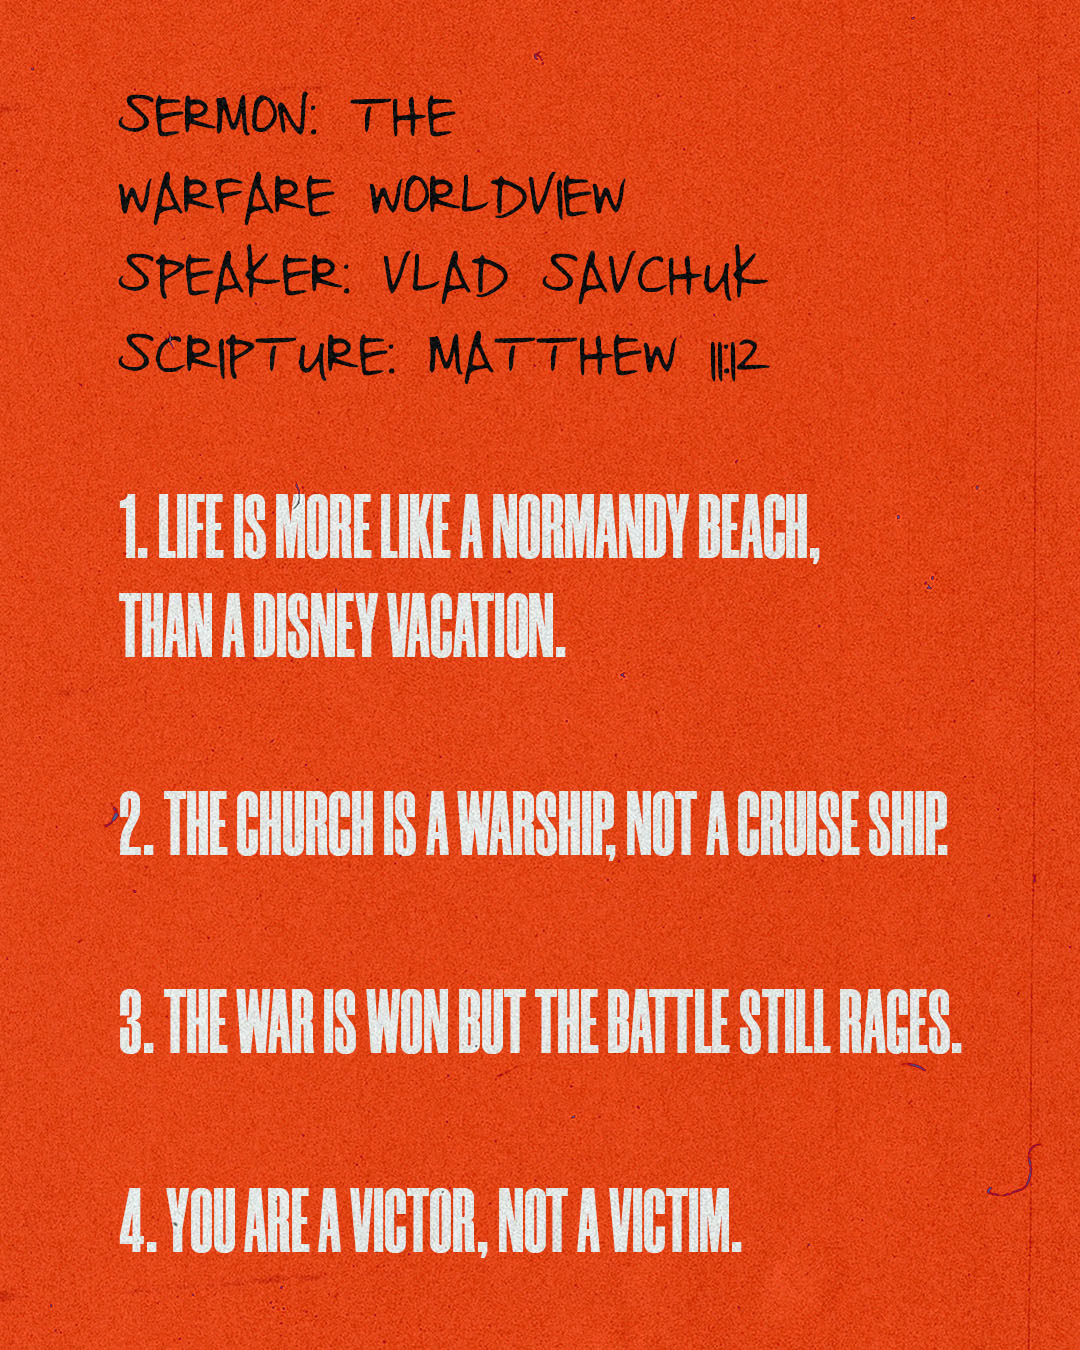 Shareable Quote for “The Warfare Worldview”